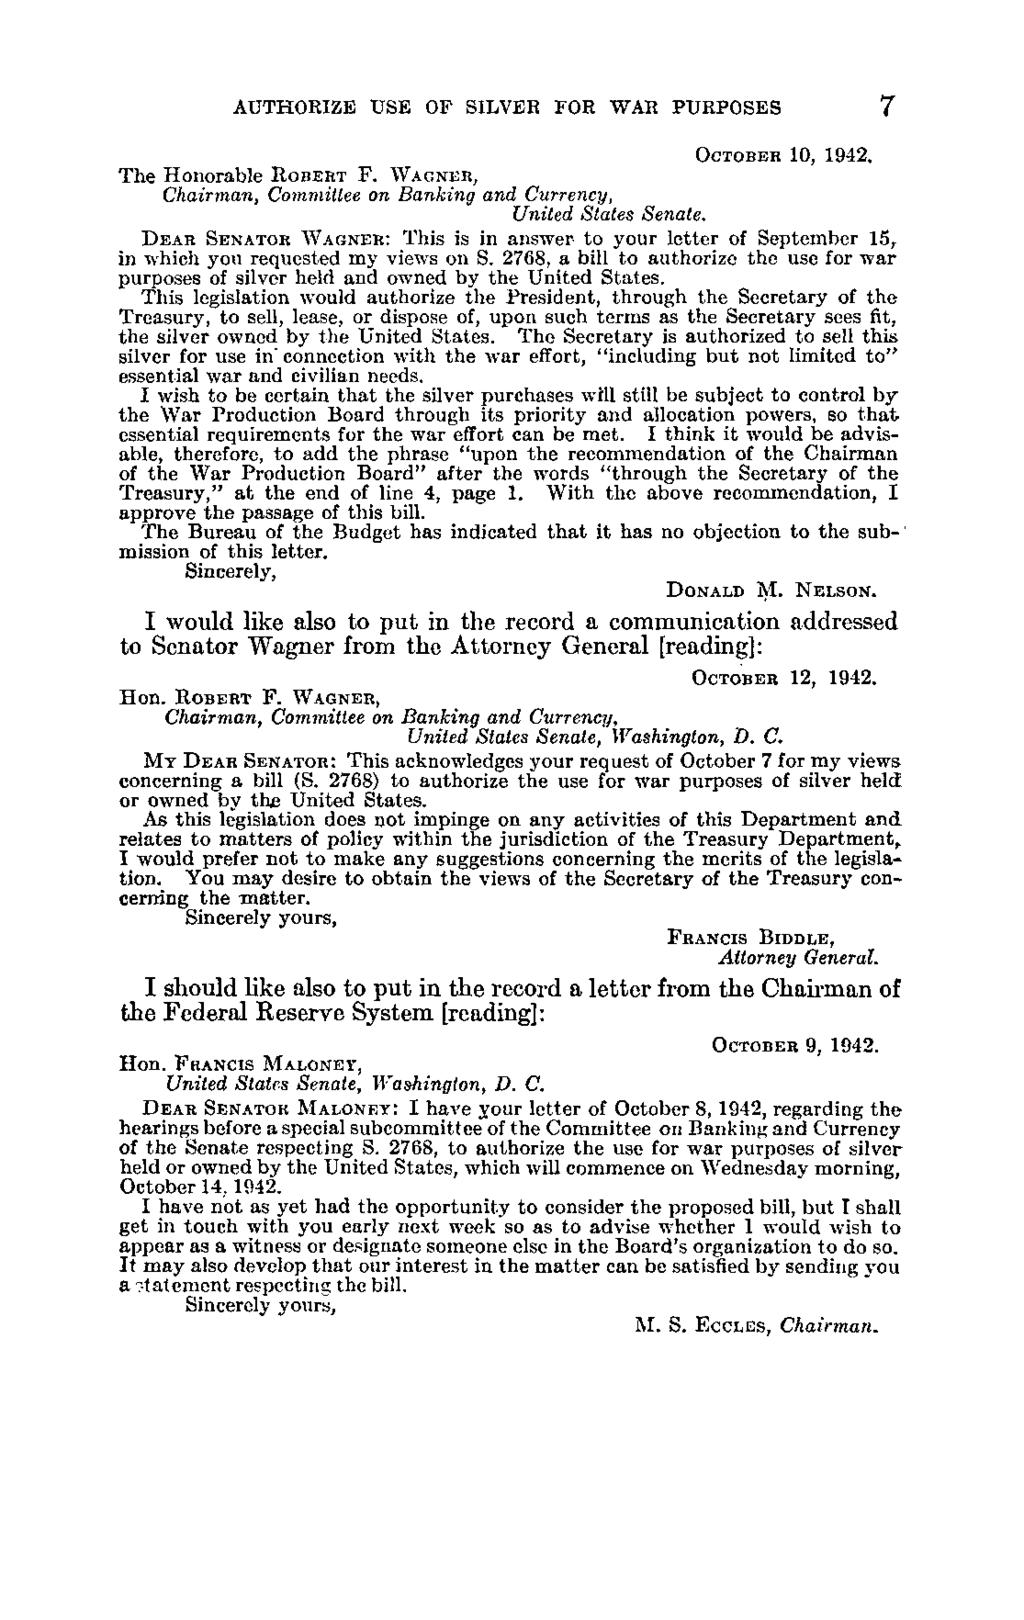 7 AUTHORIZE USE OF SILVER FOR WAR PURPOSES OCTOBER 10, 1942. The Honorable ROBERT F. WAGNER, Chairman, Committee on Banking and Currency, United States Senate.